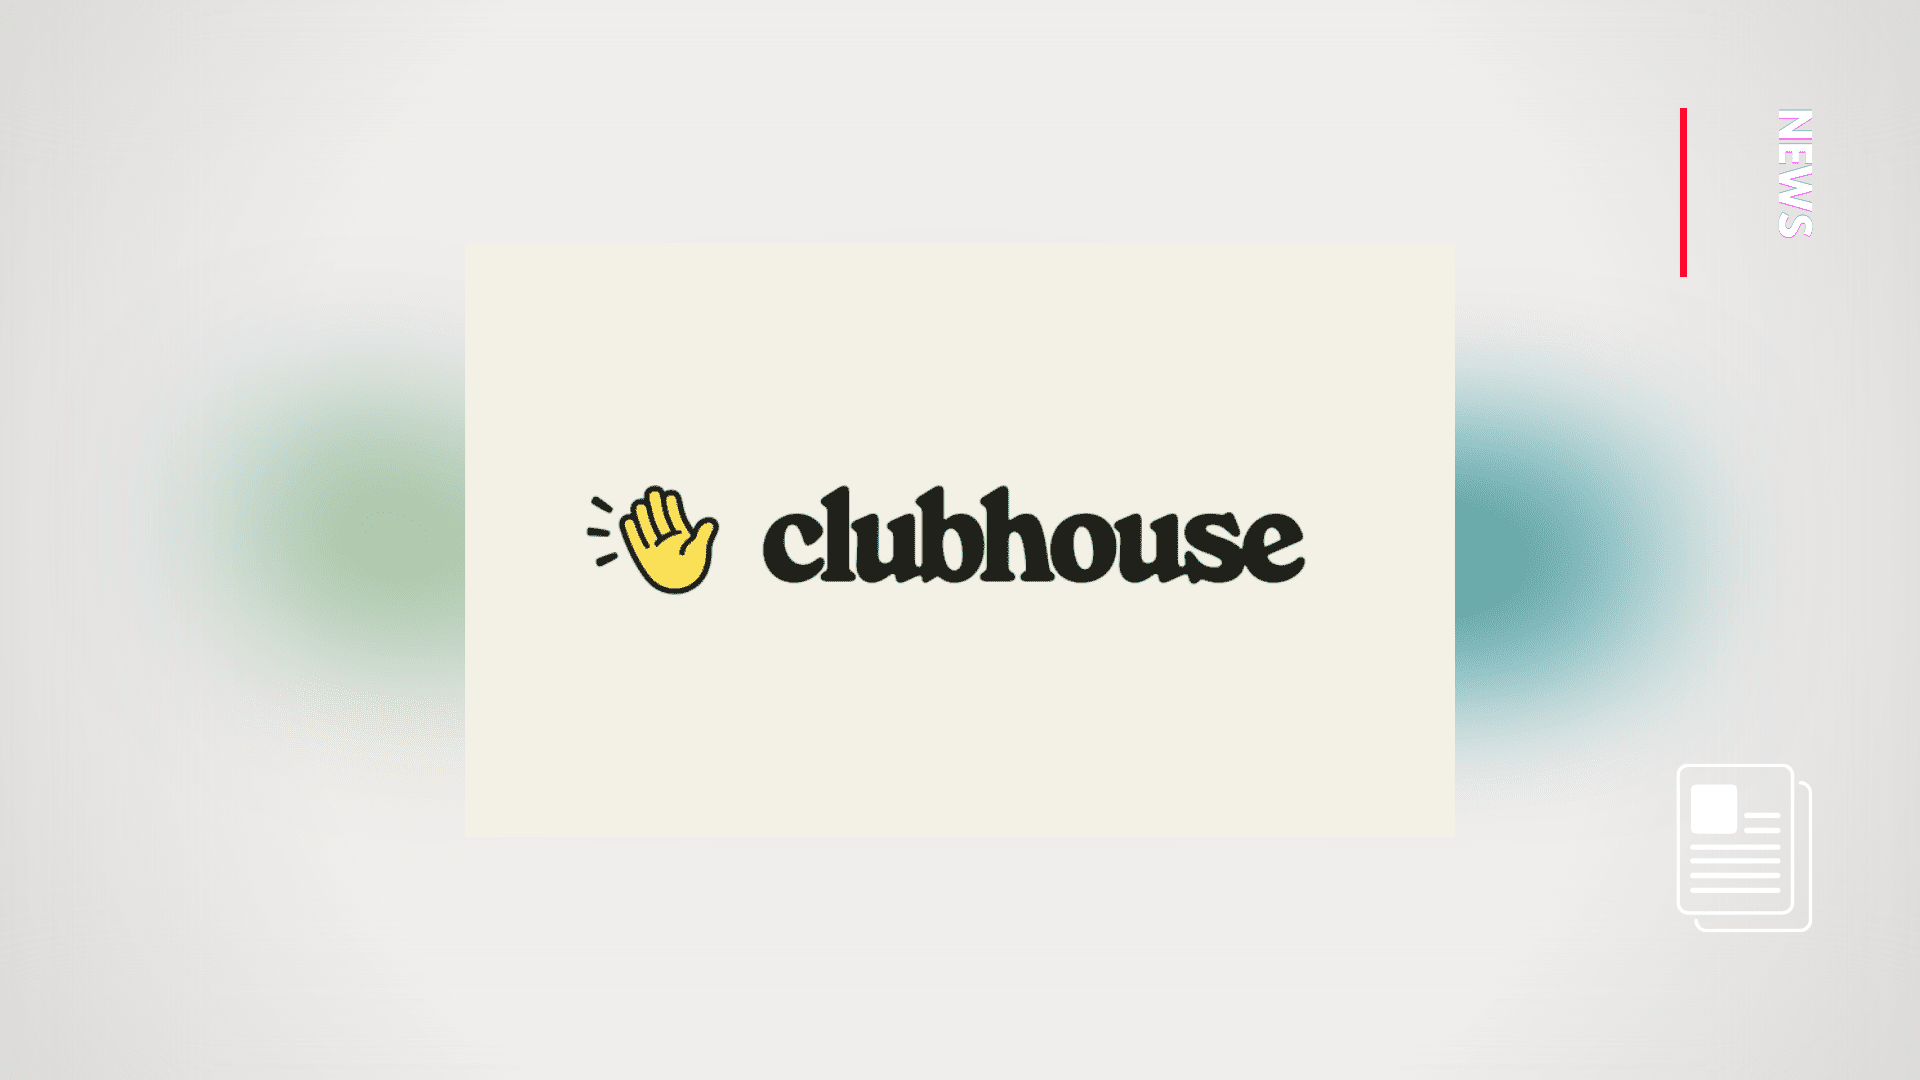 Clubhouse is now open to the public